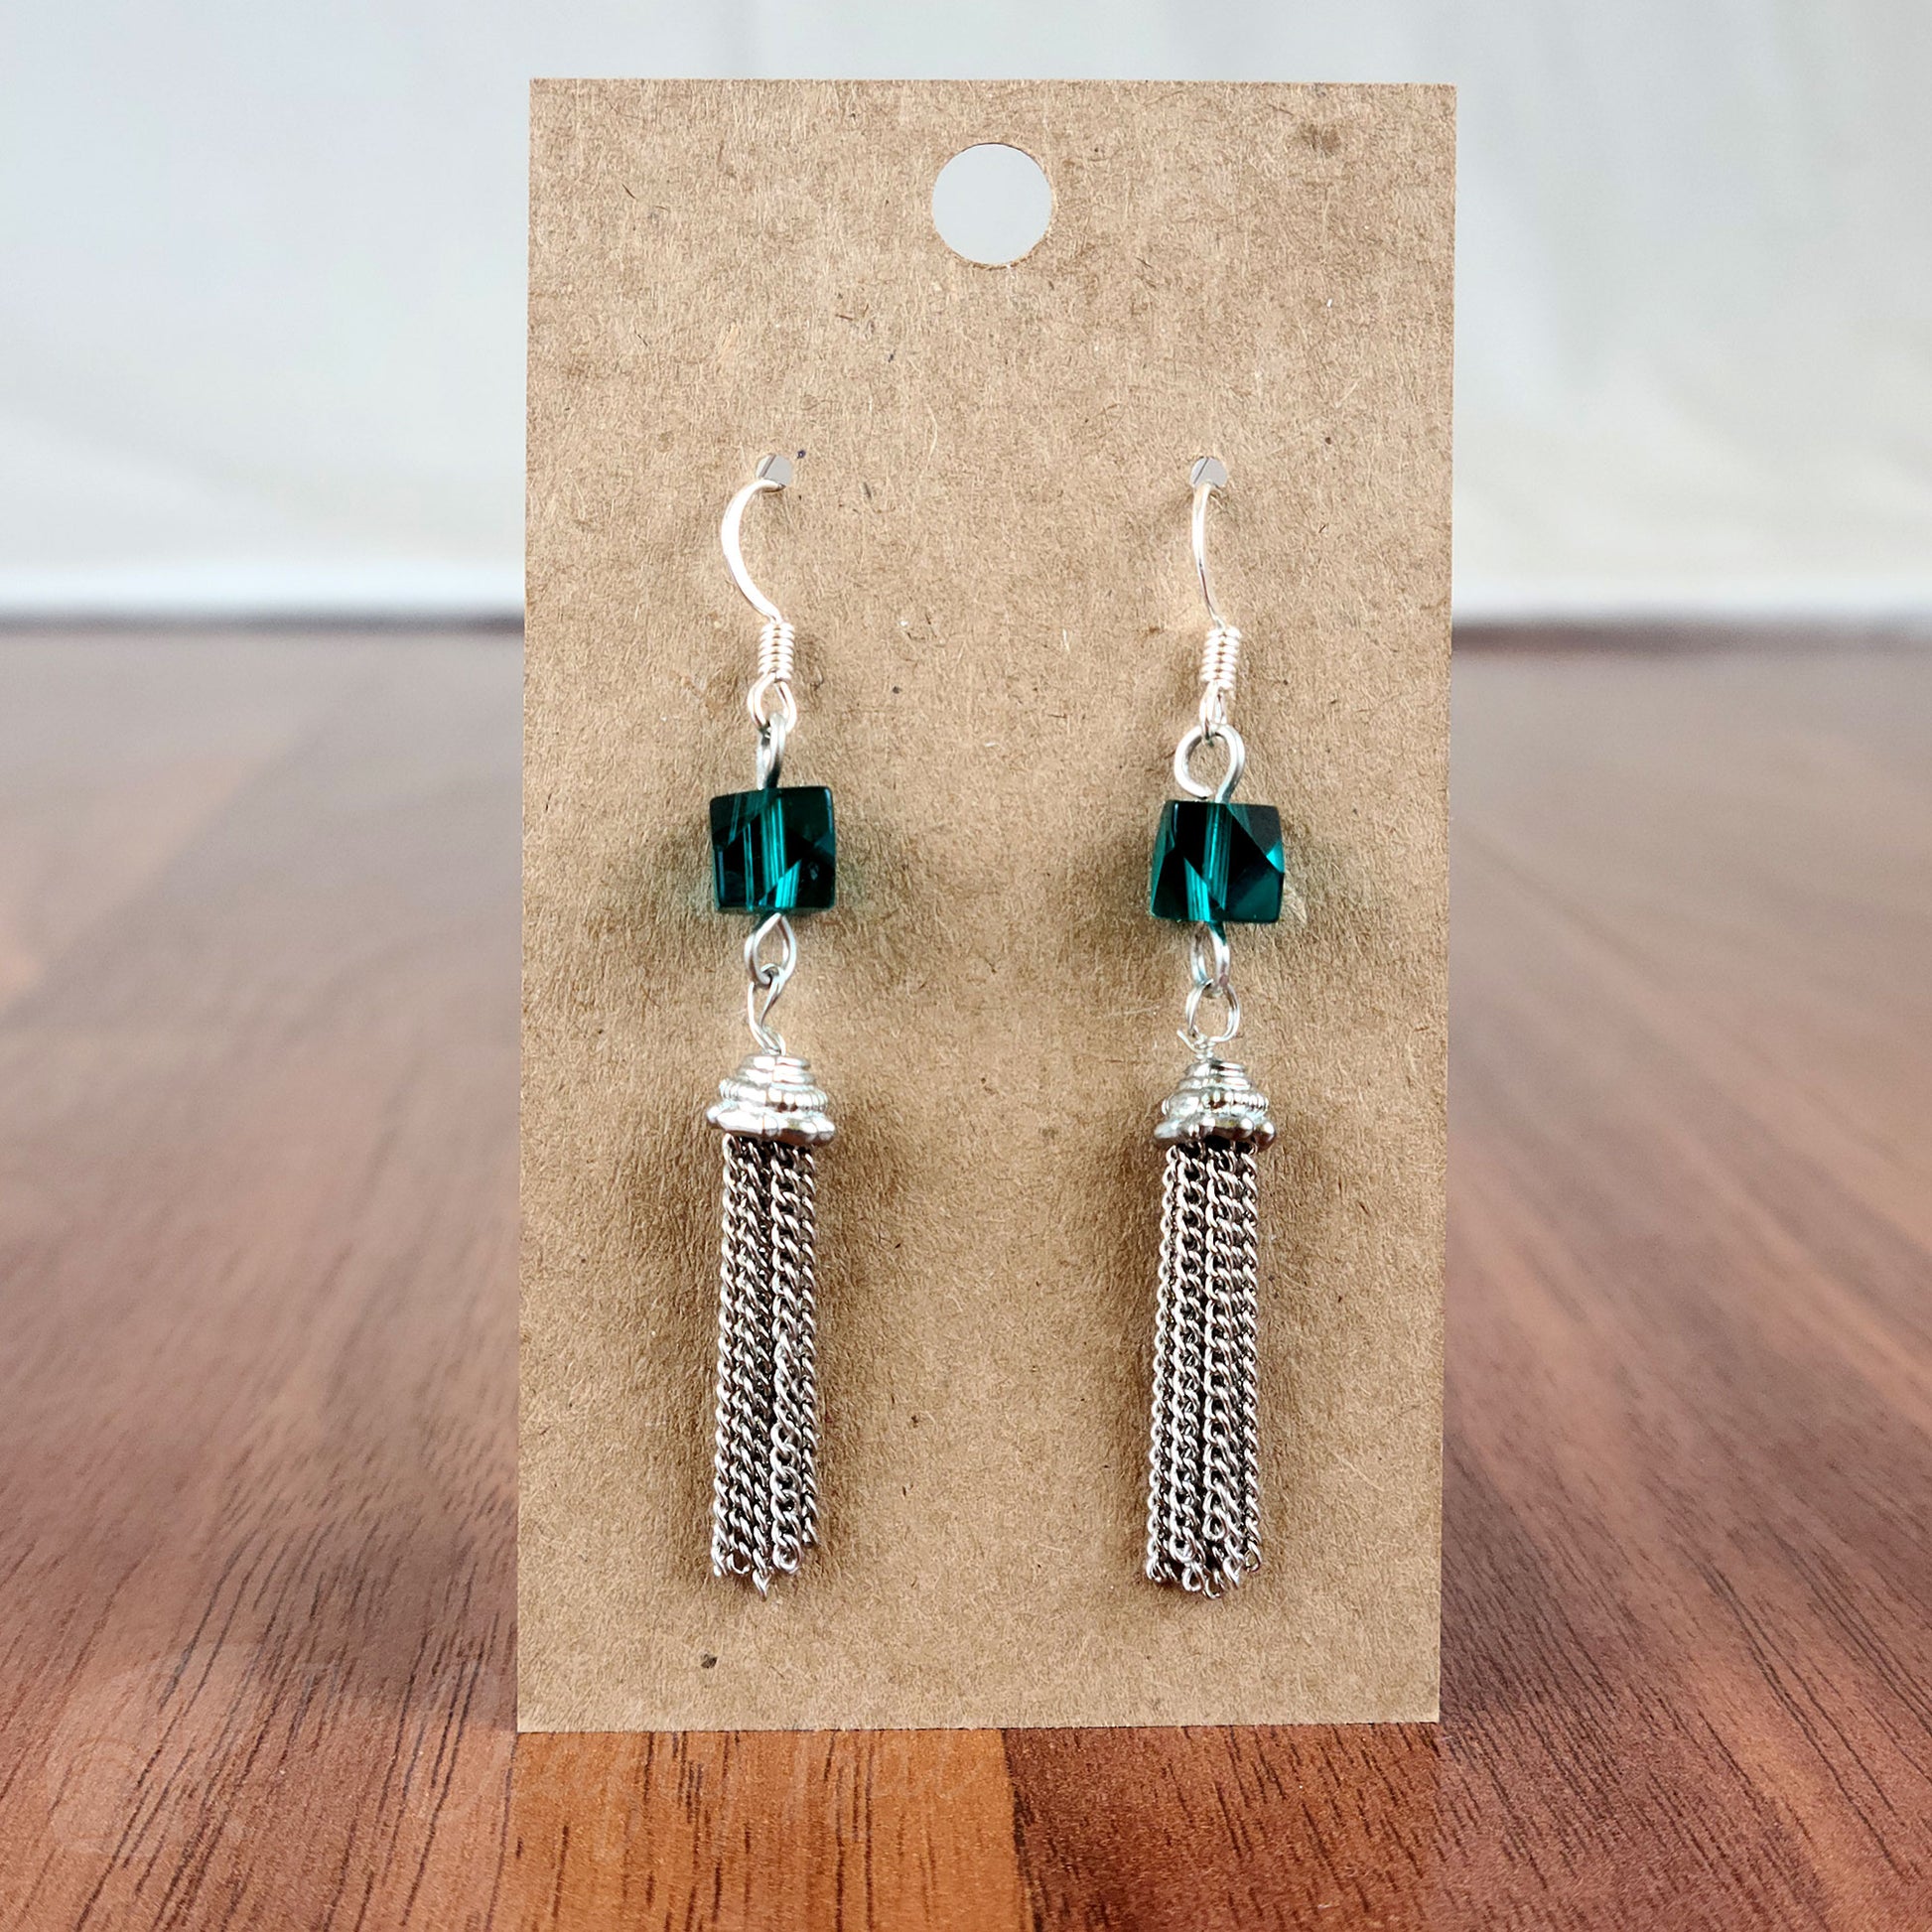 Drop earring featuring a dark teal angle-cut cube crystal bead and silver chain tassle and fittings